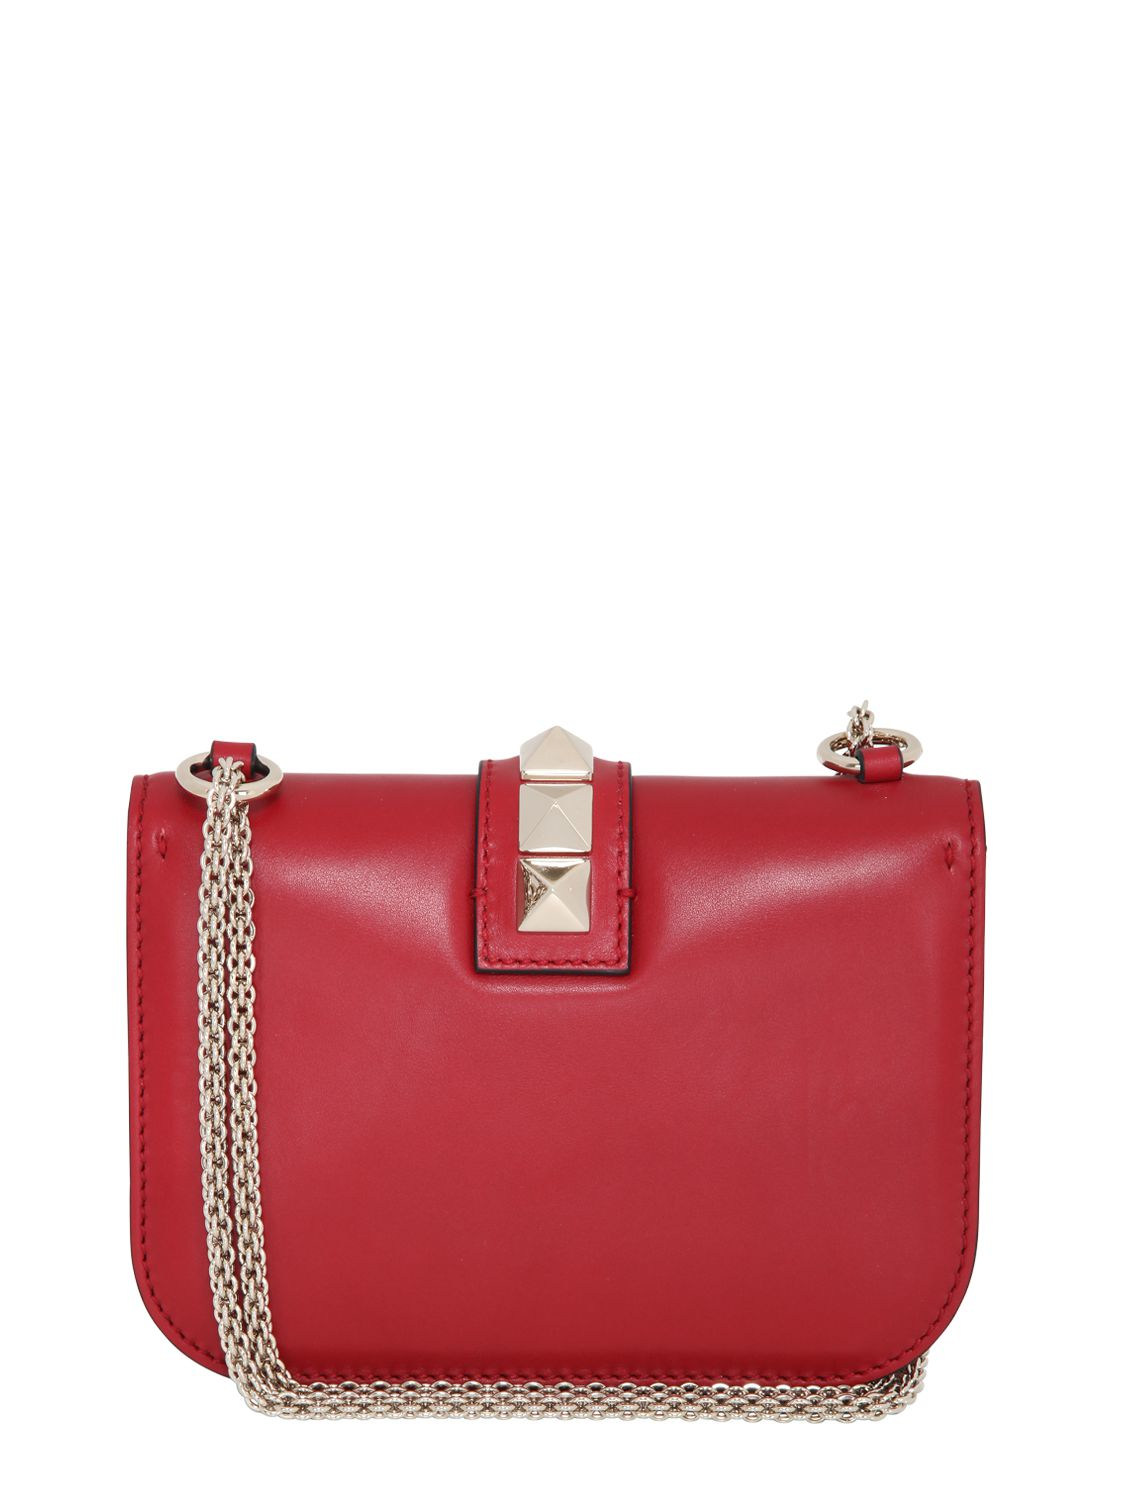 Lyst - Valentino Small Lock Leather Shoulder Bag in Red